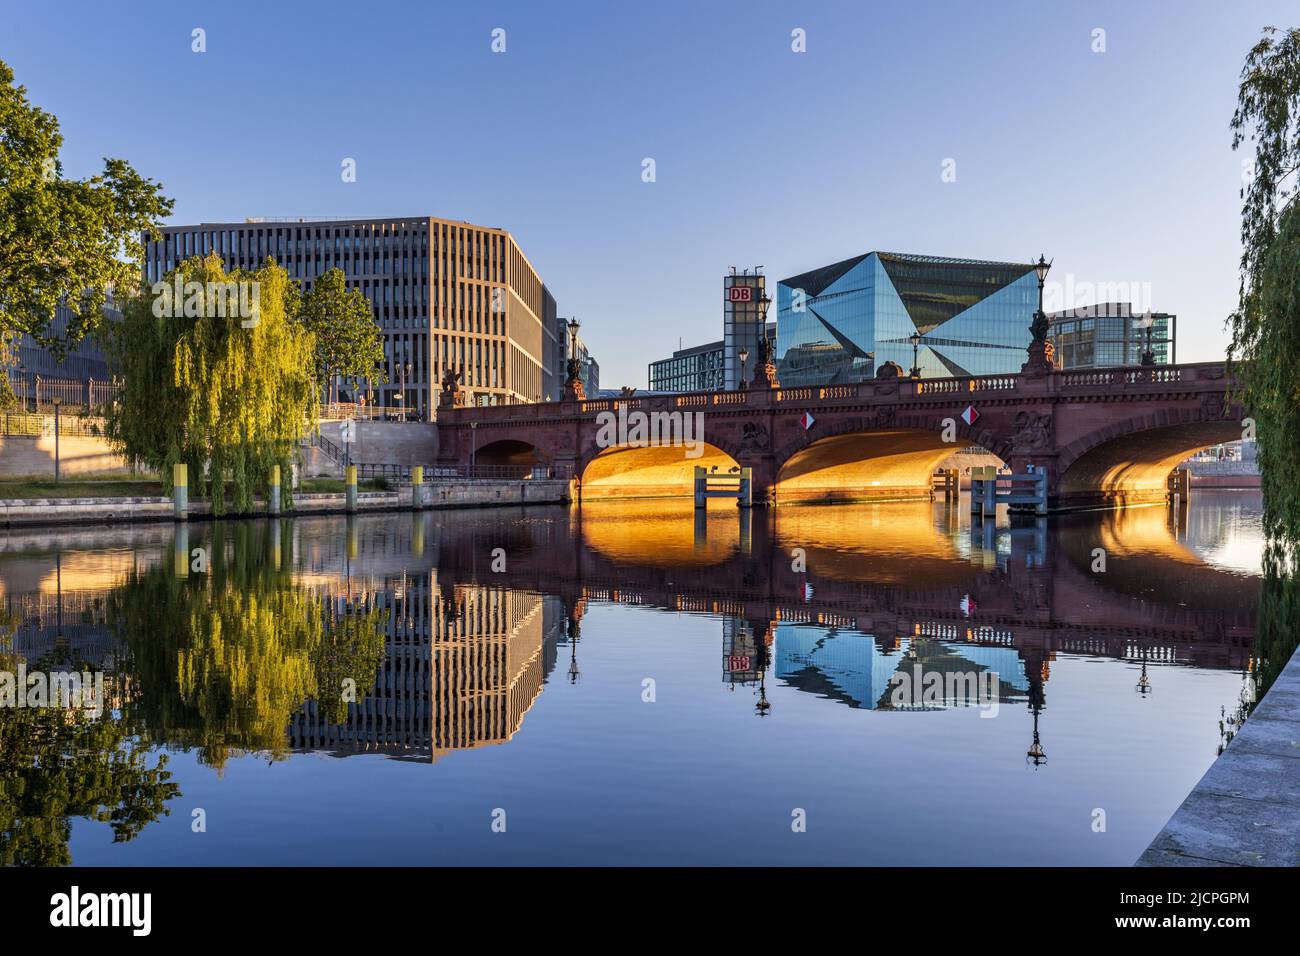 The beautiful stone Moltke Bridge over the Spree River, with Cube Berlin and Berlin Hauptbahnhof in the background. Stock Photo